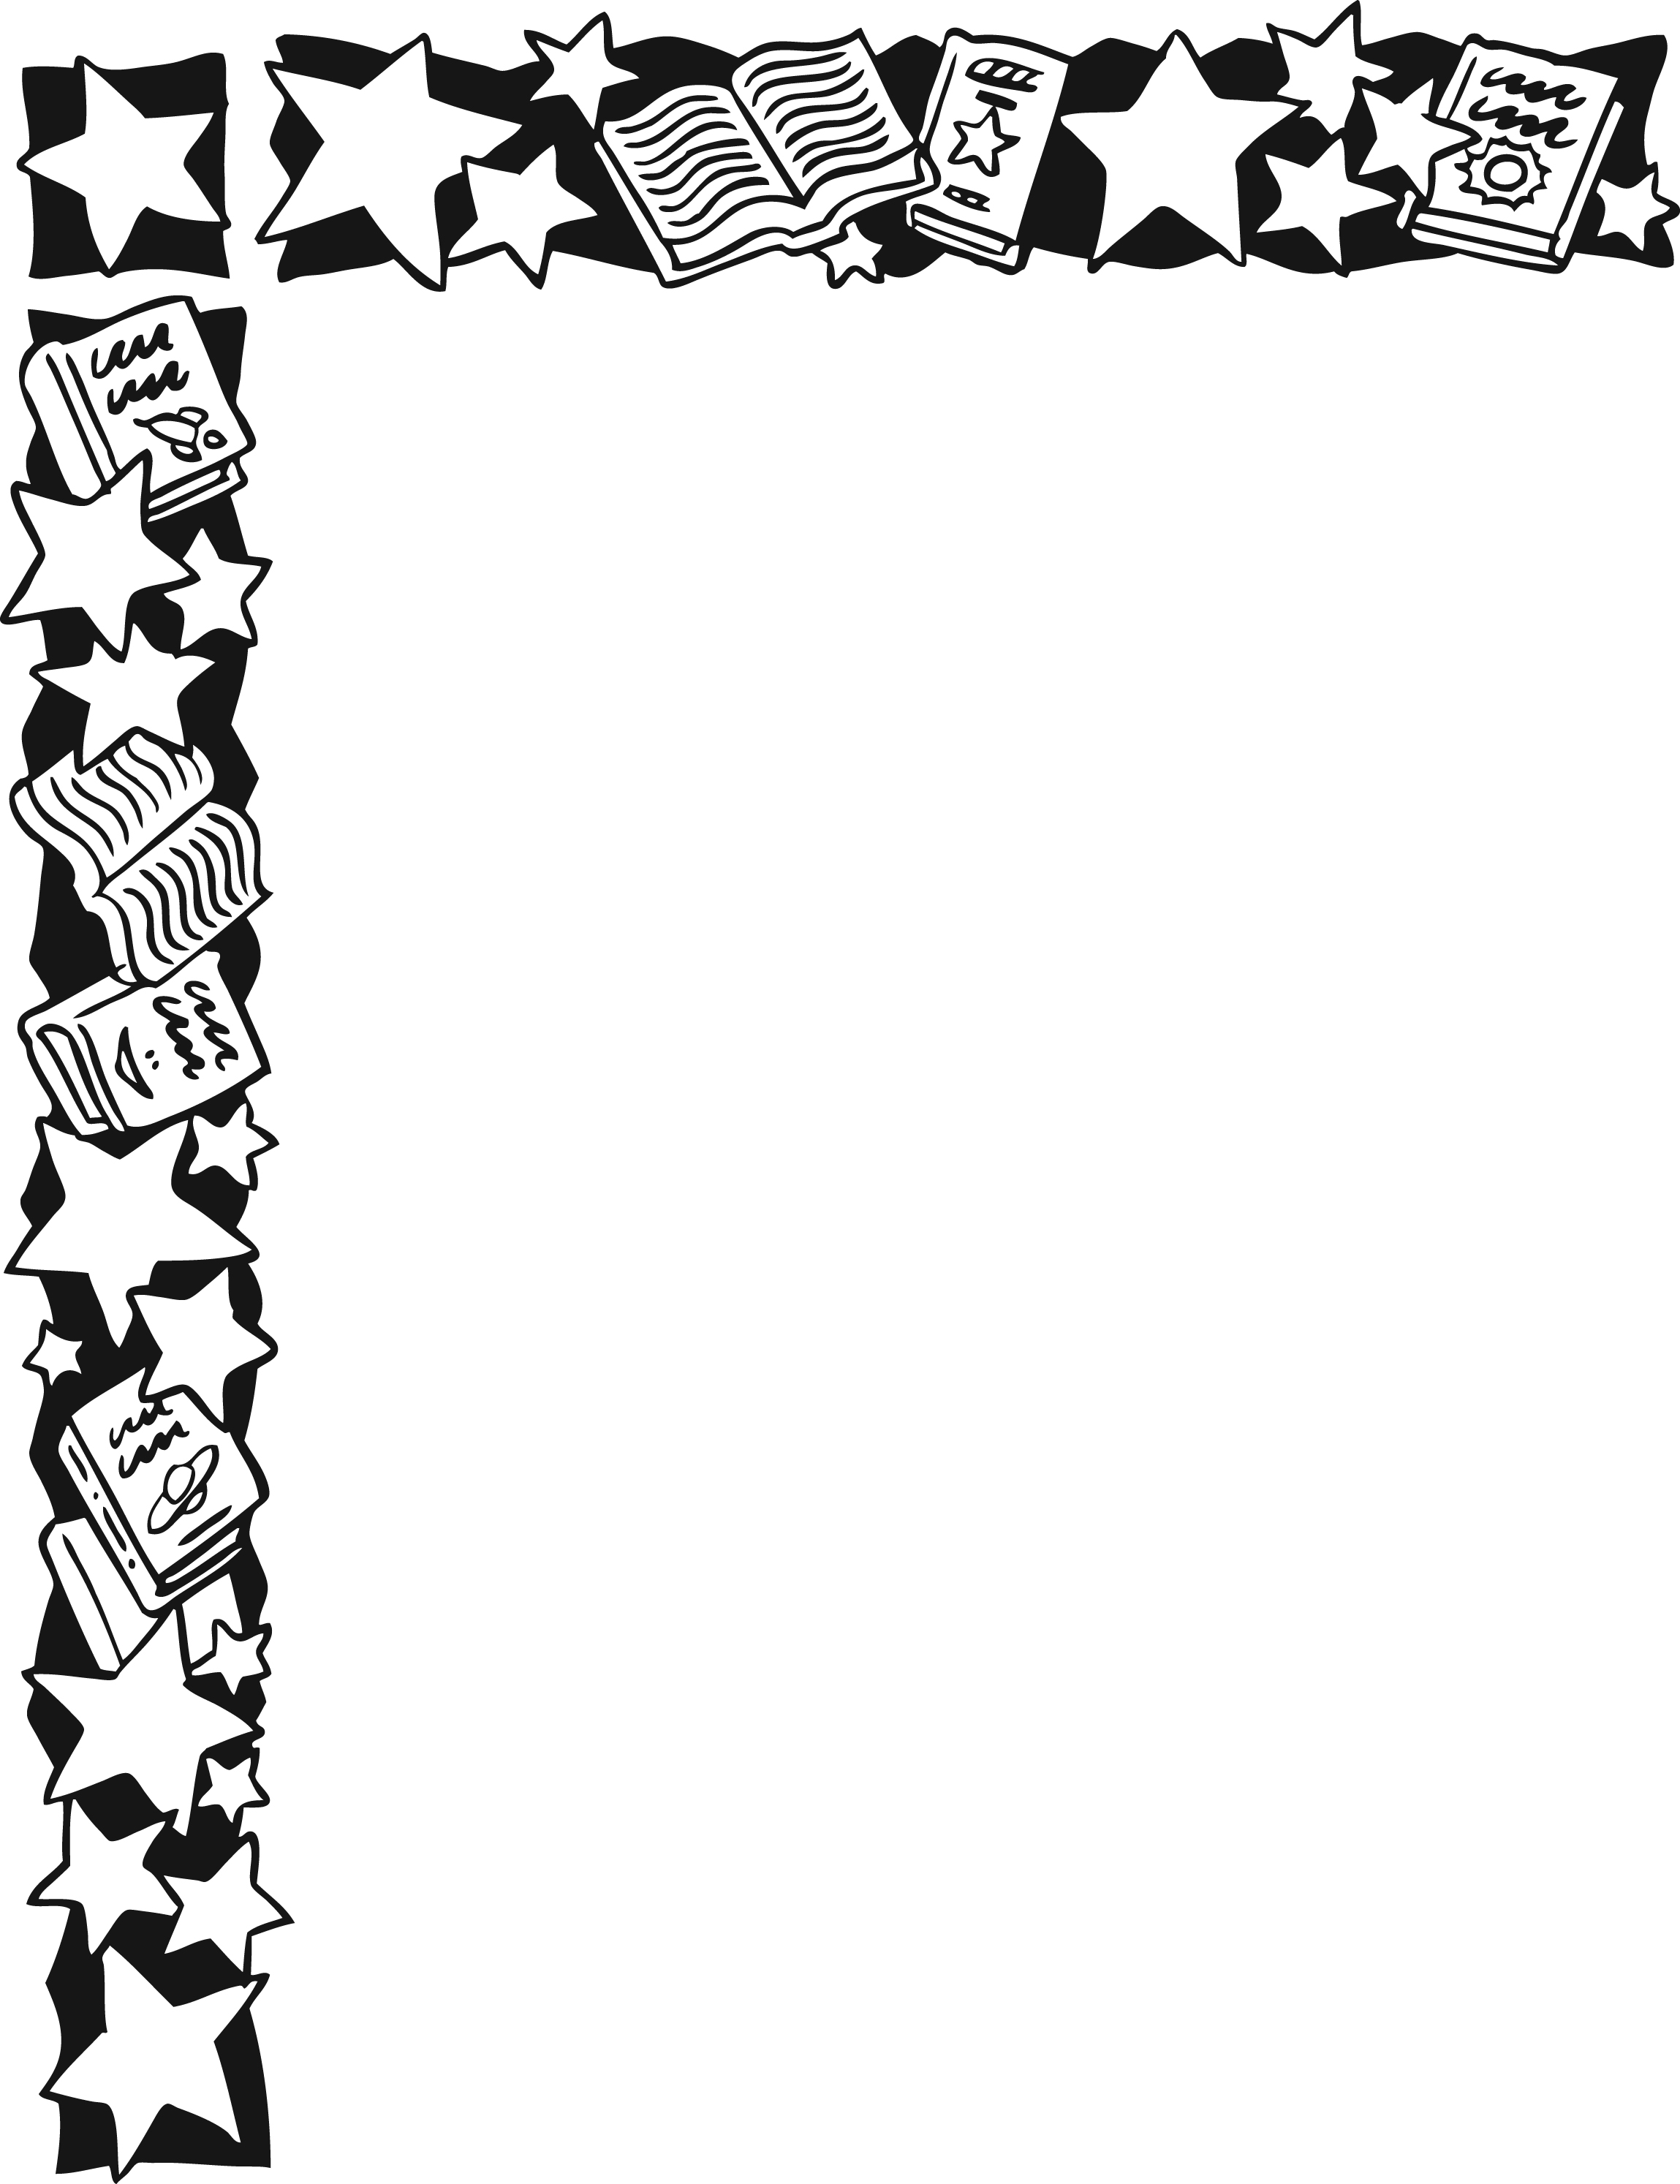 Star Page Border - ClipArt Best